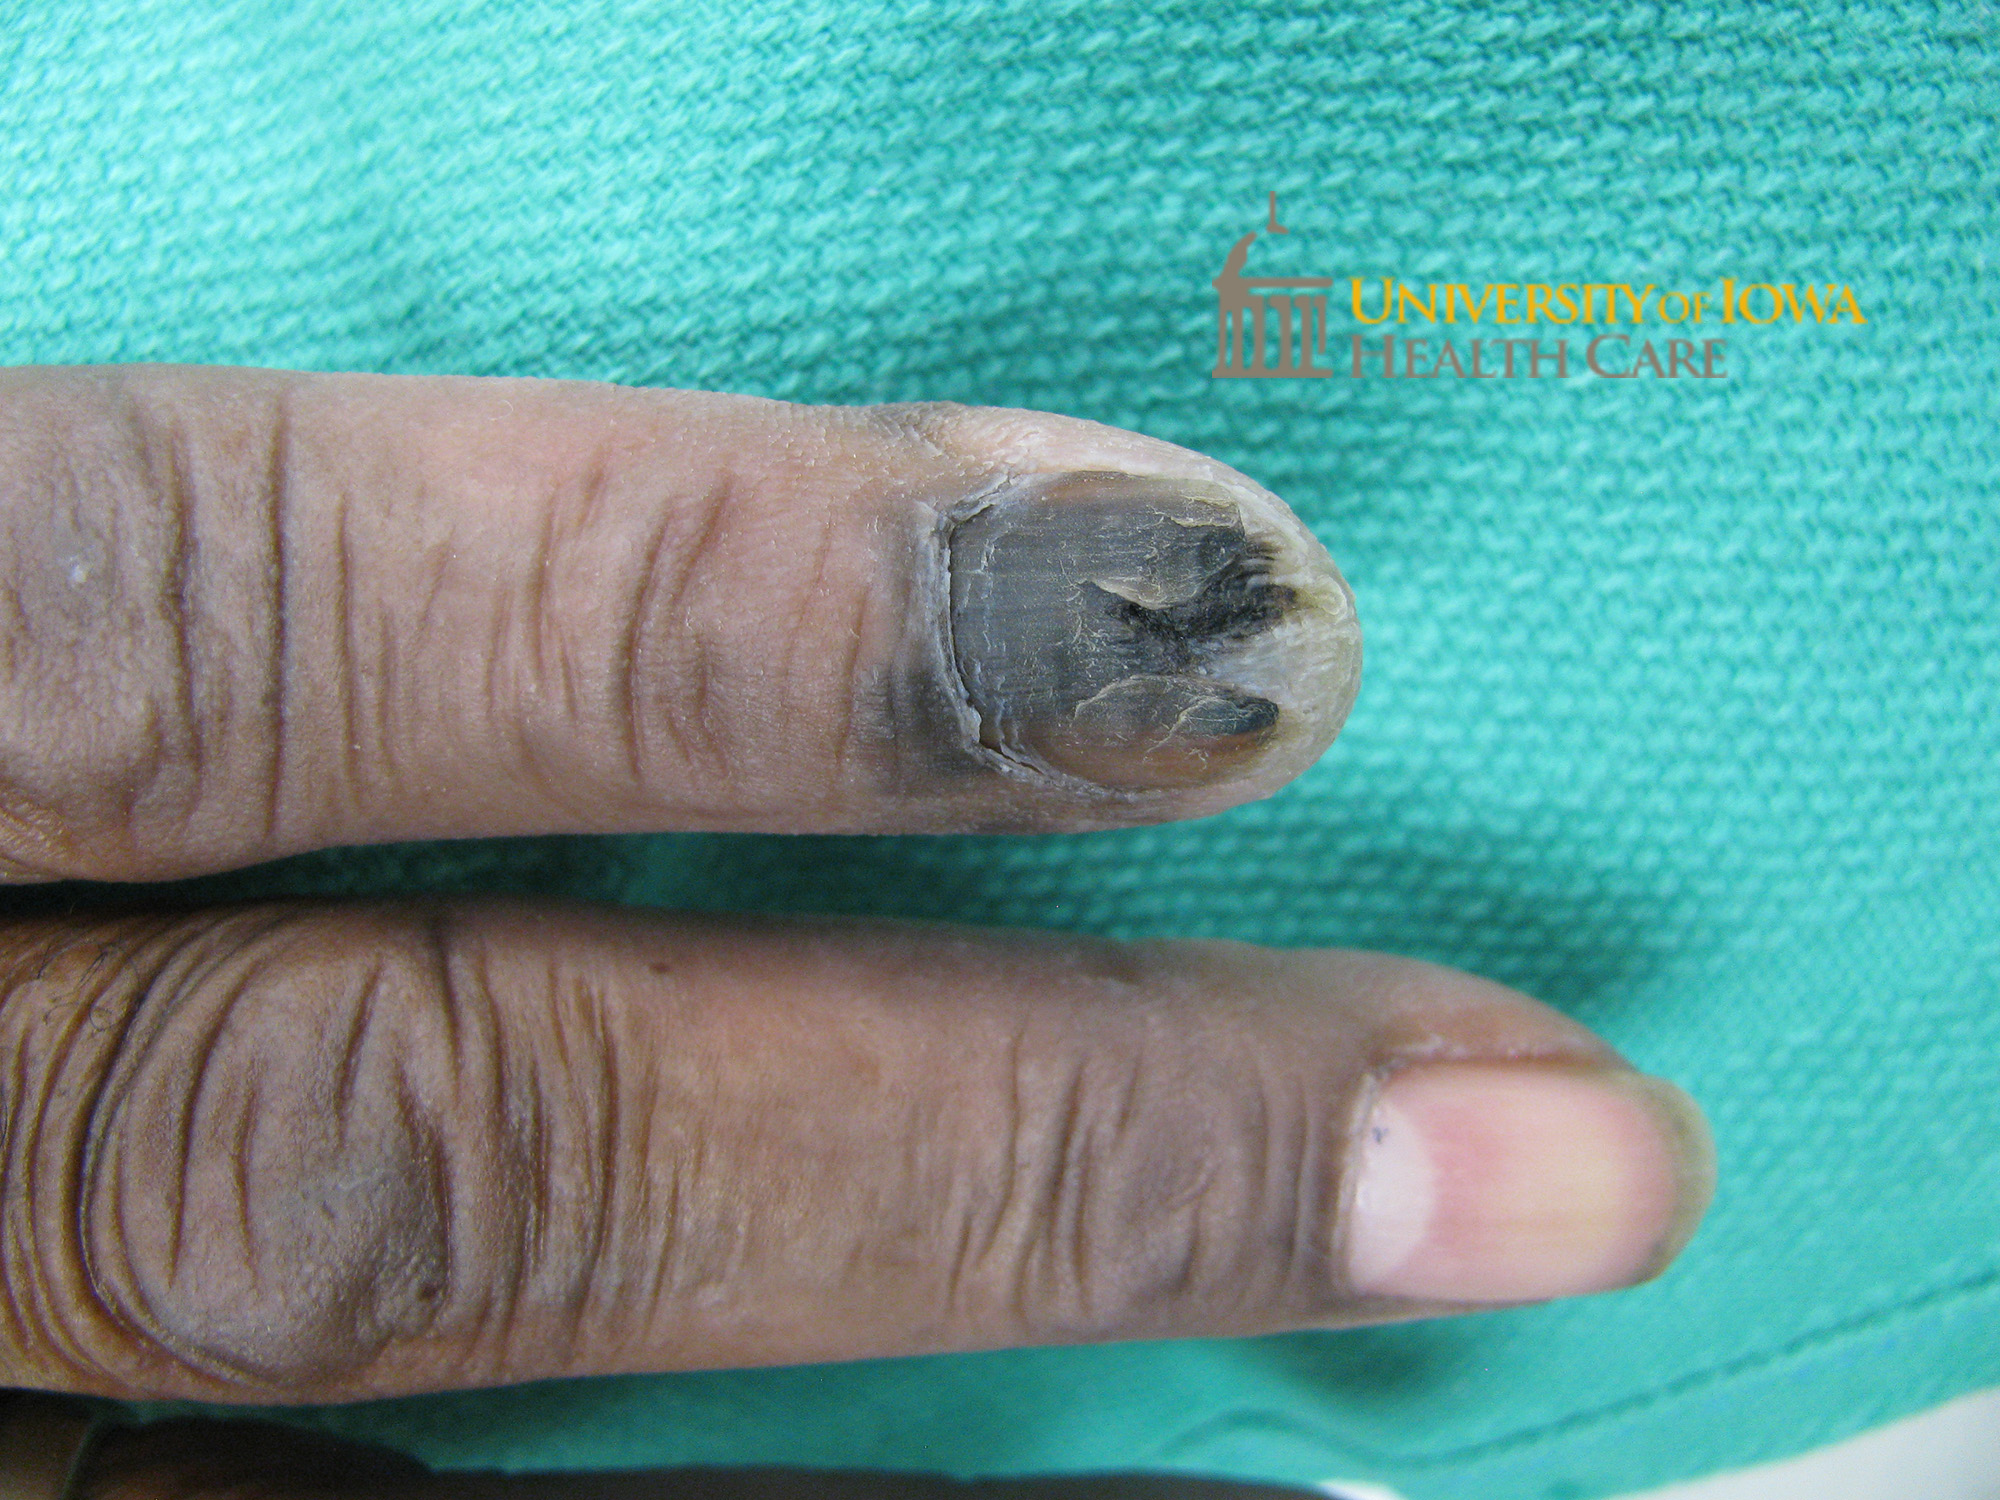 A brown and black plaque on the proximal nail fold extending onto the distal index fingertip. (click images for higher resolution).